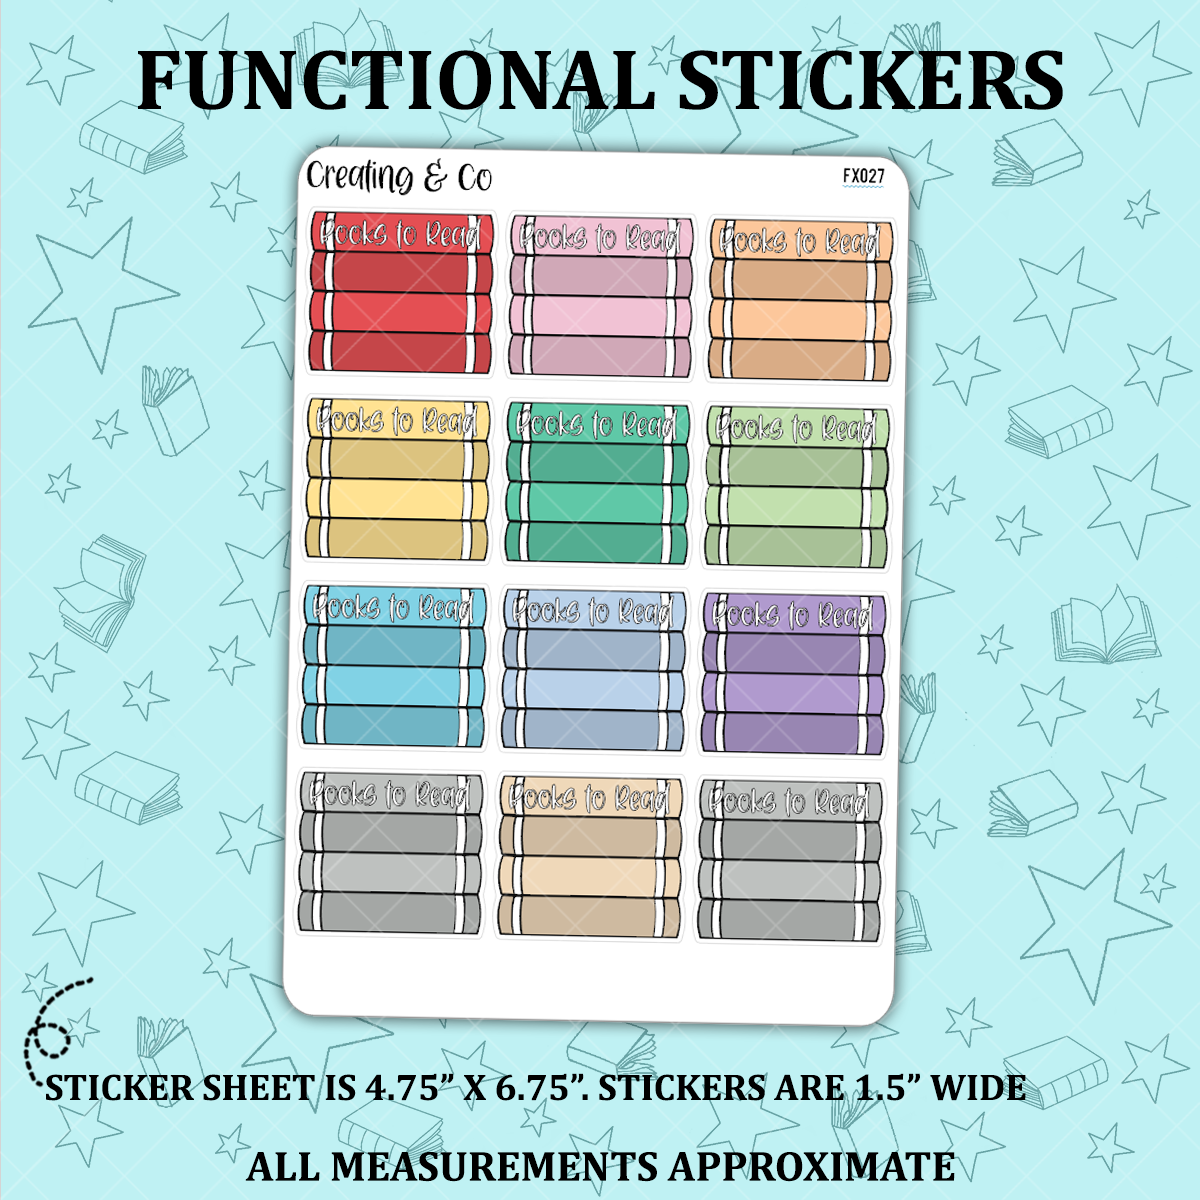 Books to Read Book Stack Label Reading Functional Sticker Sheet - FX027